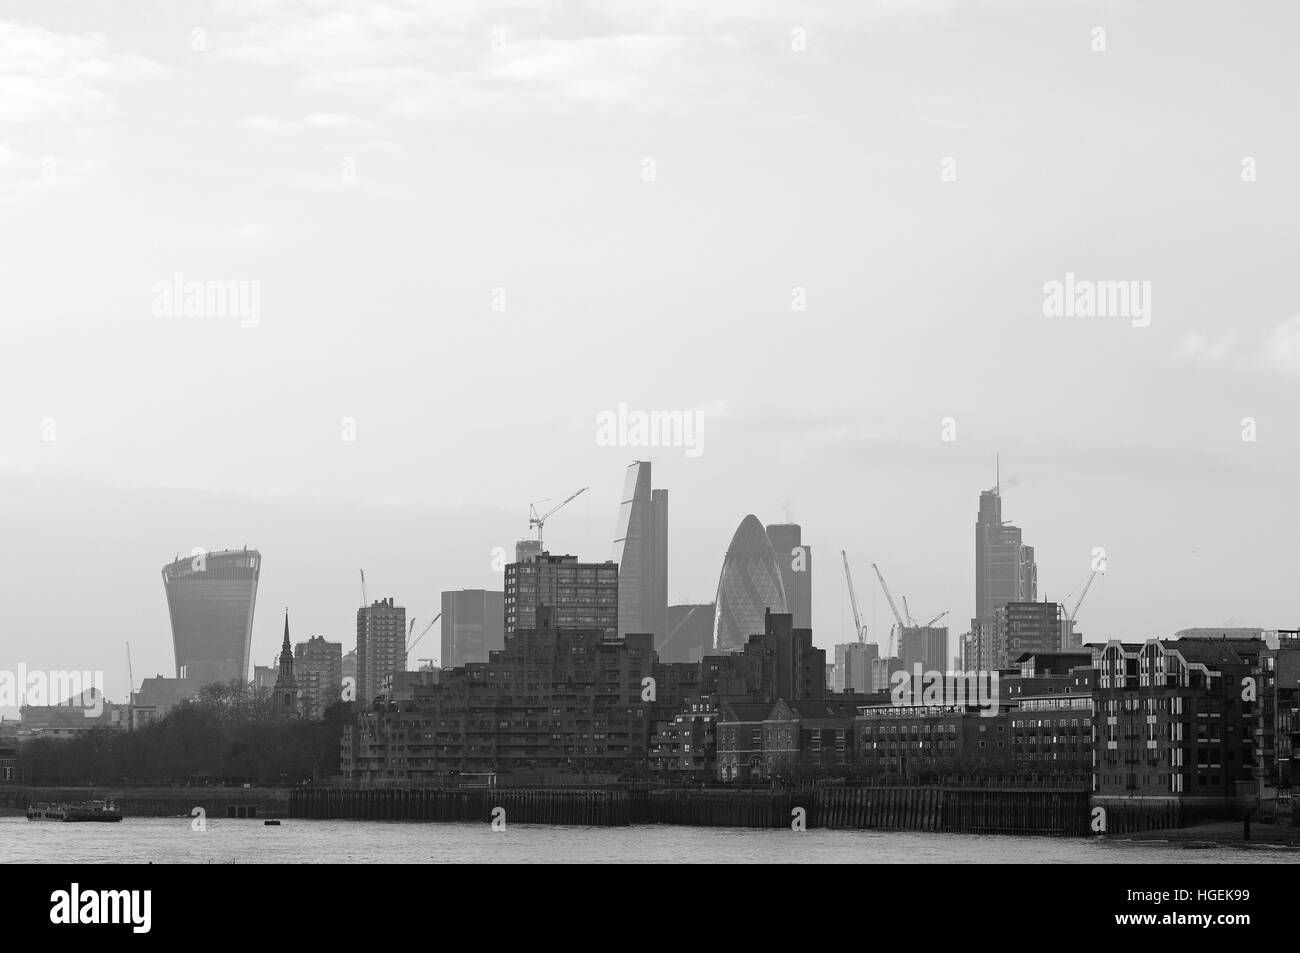 Looking towards the capital city of London, the gherkin, lloyds and the ...